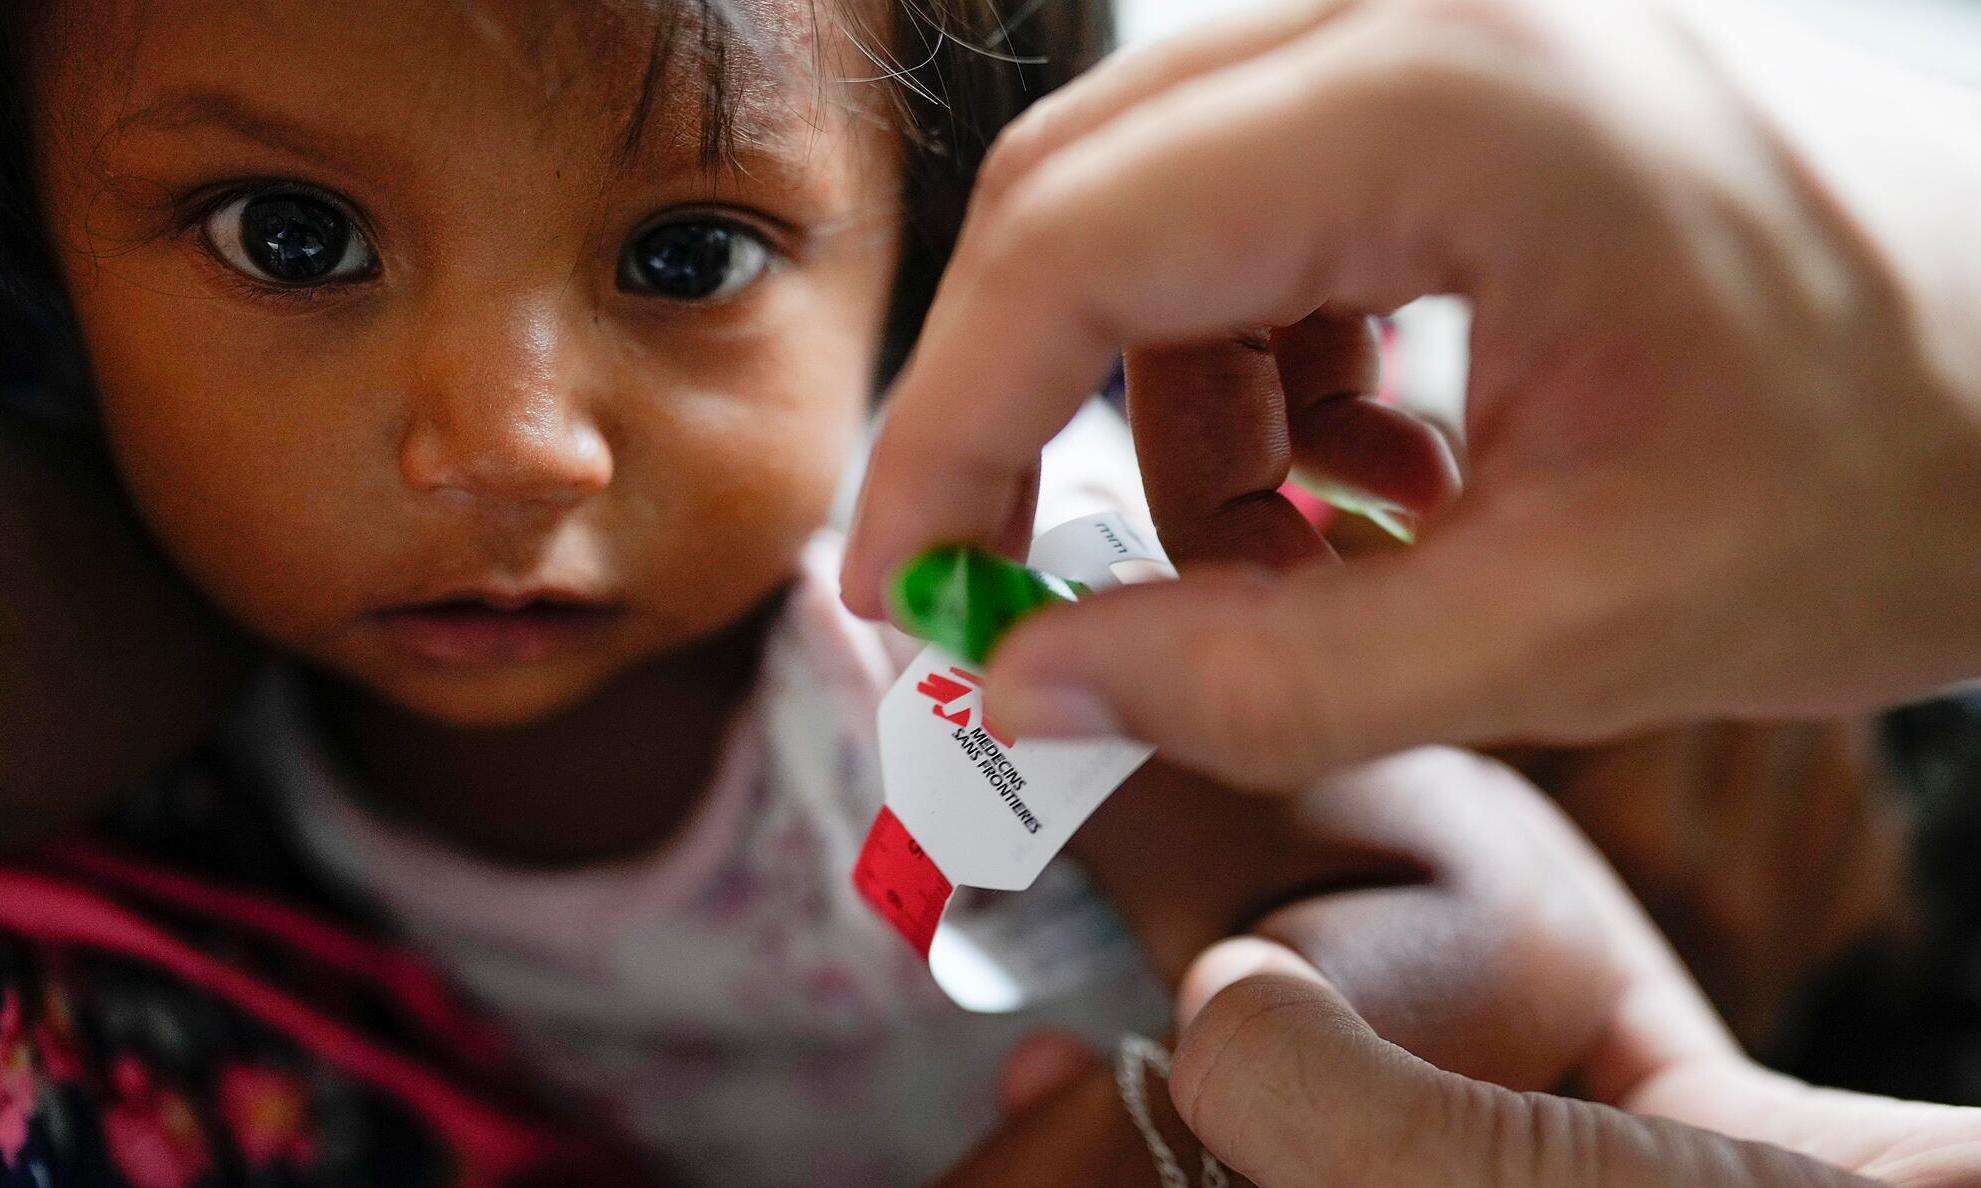 An indigenous child receives medical care from MSF teams in Venezuela.